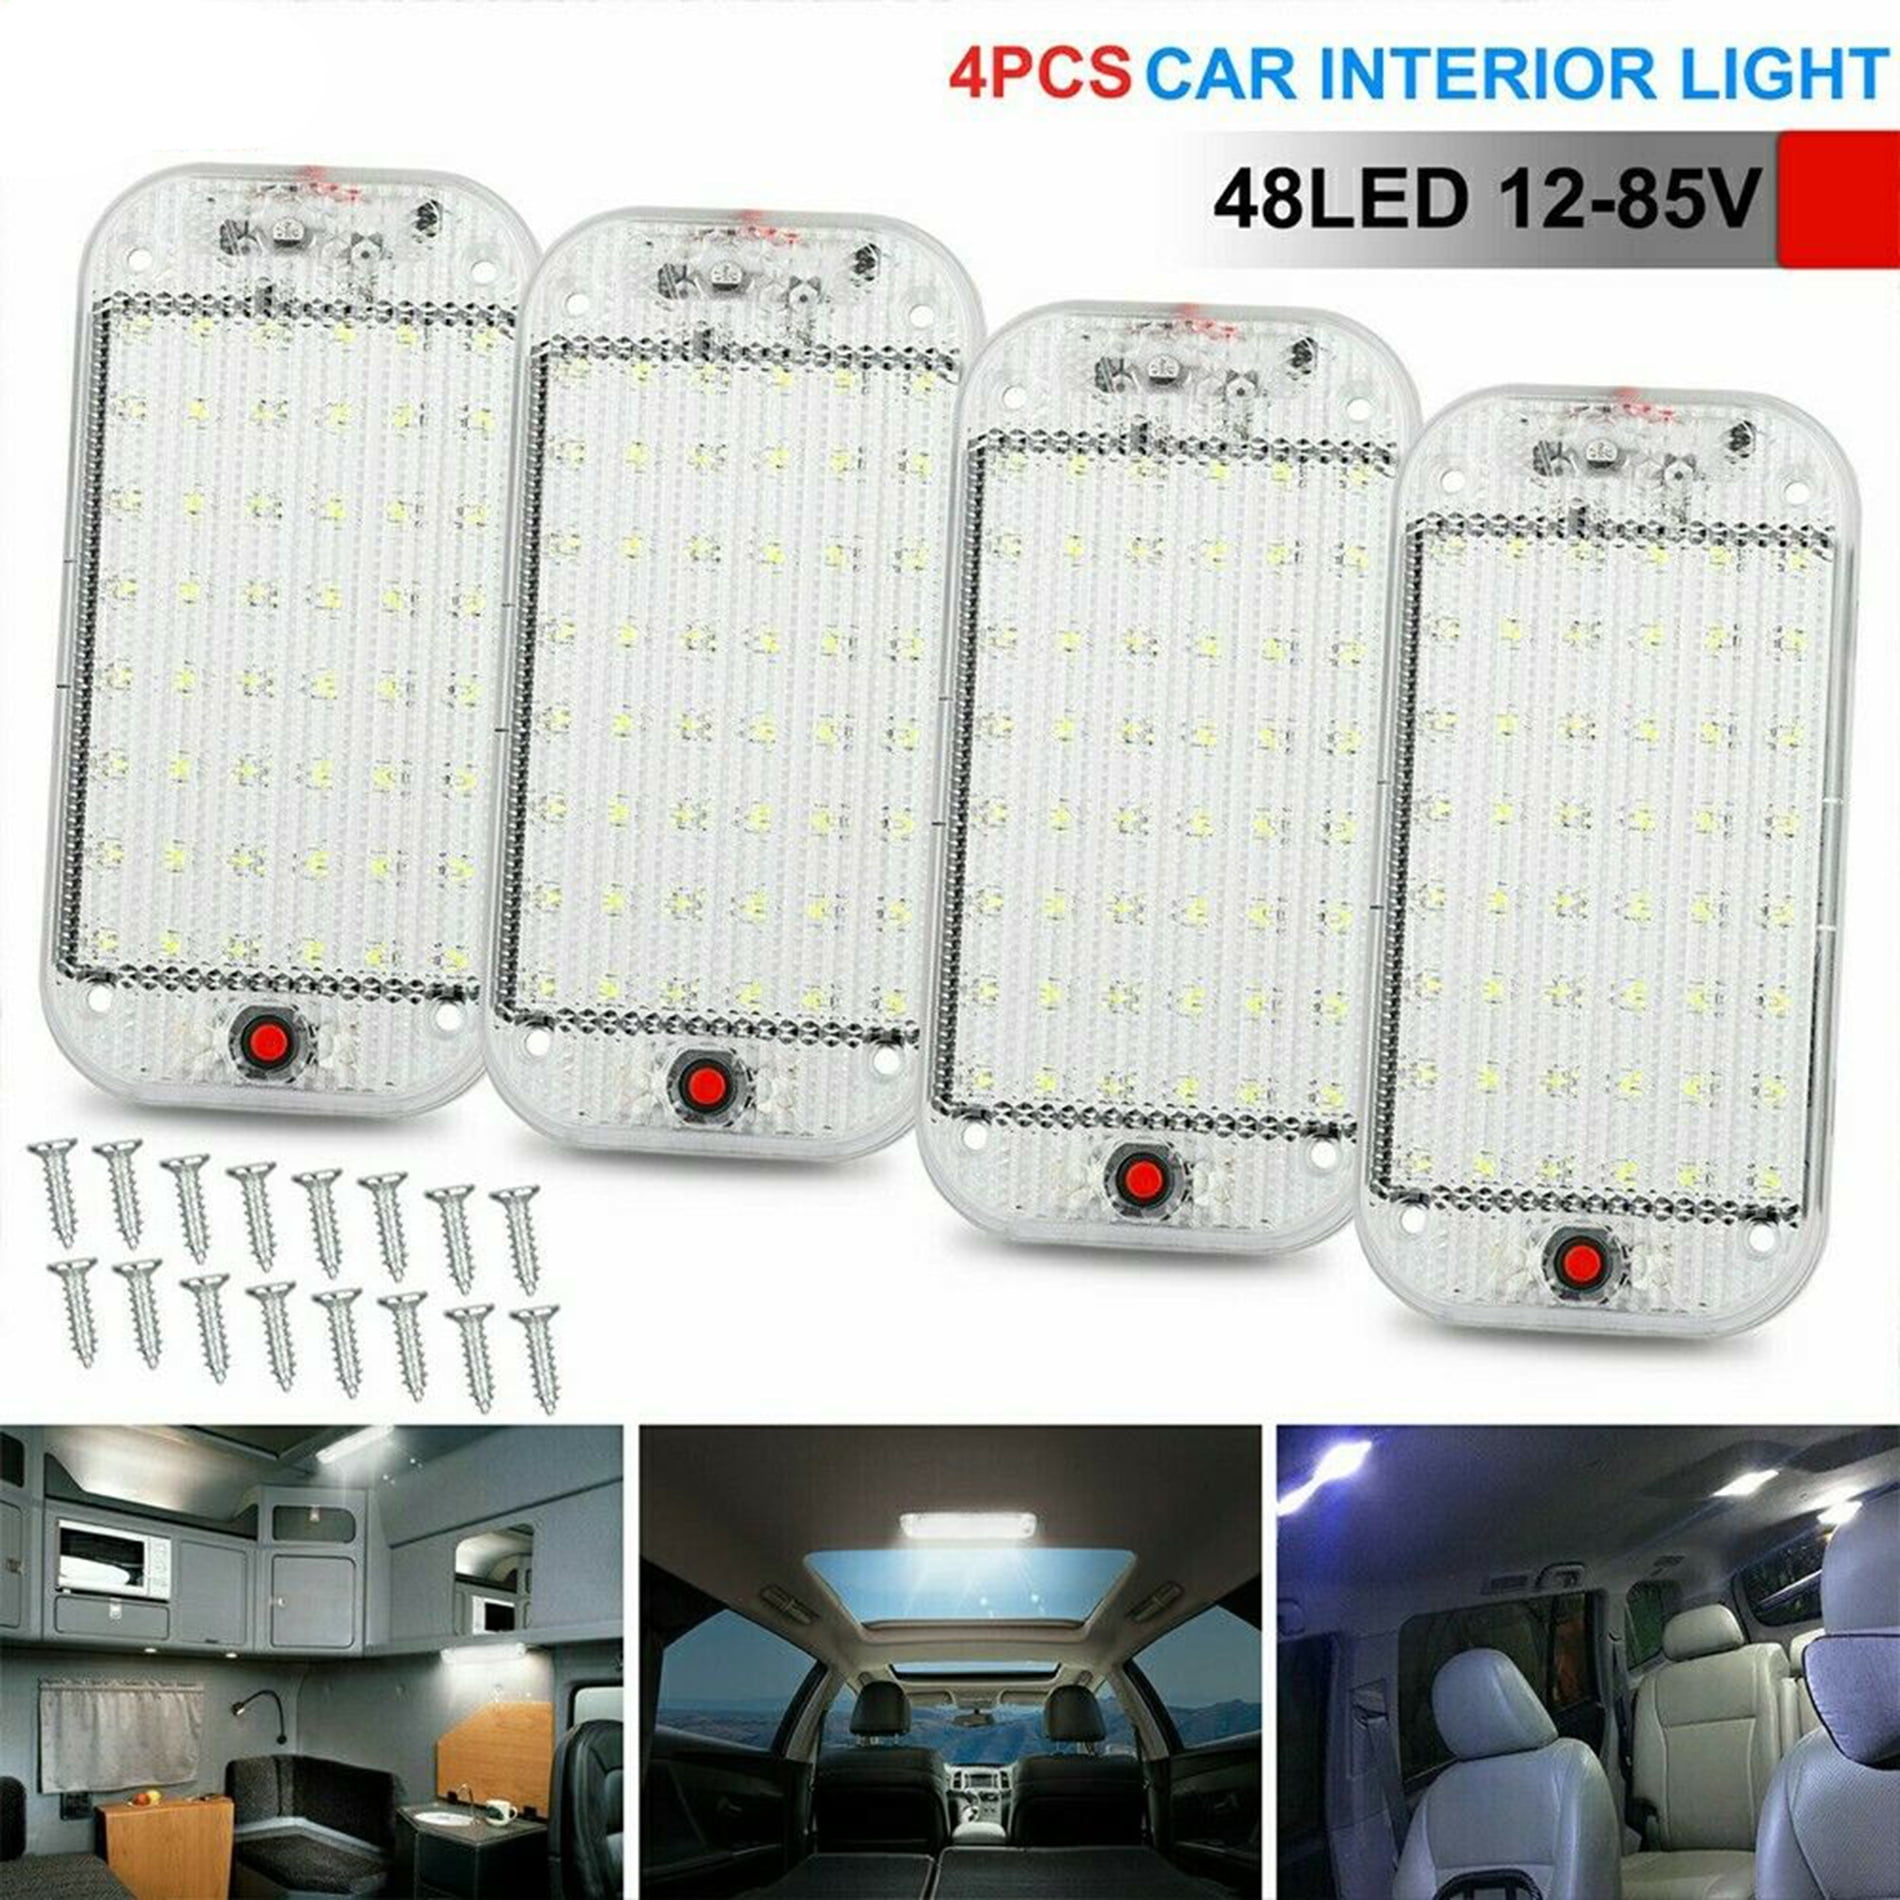 Car RV Trailer Camper Boat Caravan Motorhome Van Truck Lorry Camper on/off  Dimming Switch 12V LED Interior Bar Ceiling Dome Light Fixture Interior  Lighting - China Auto Parts, Auto Accessories